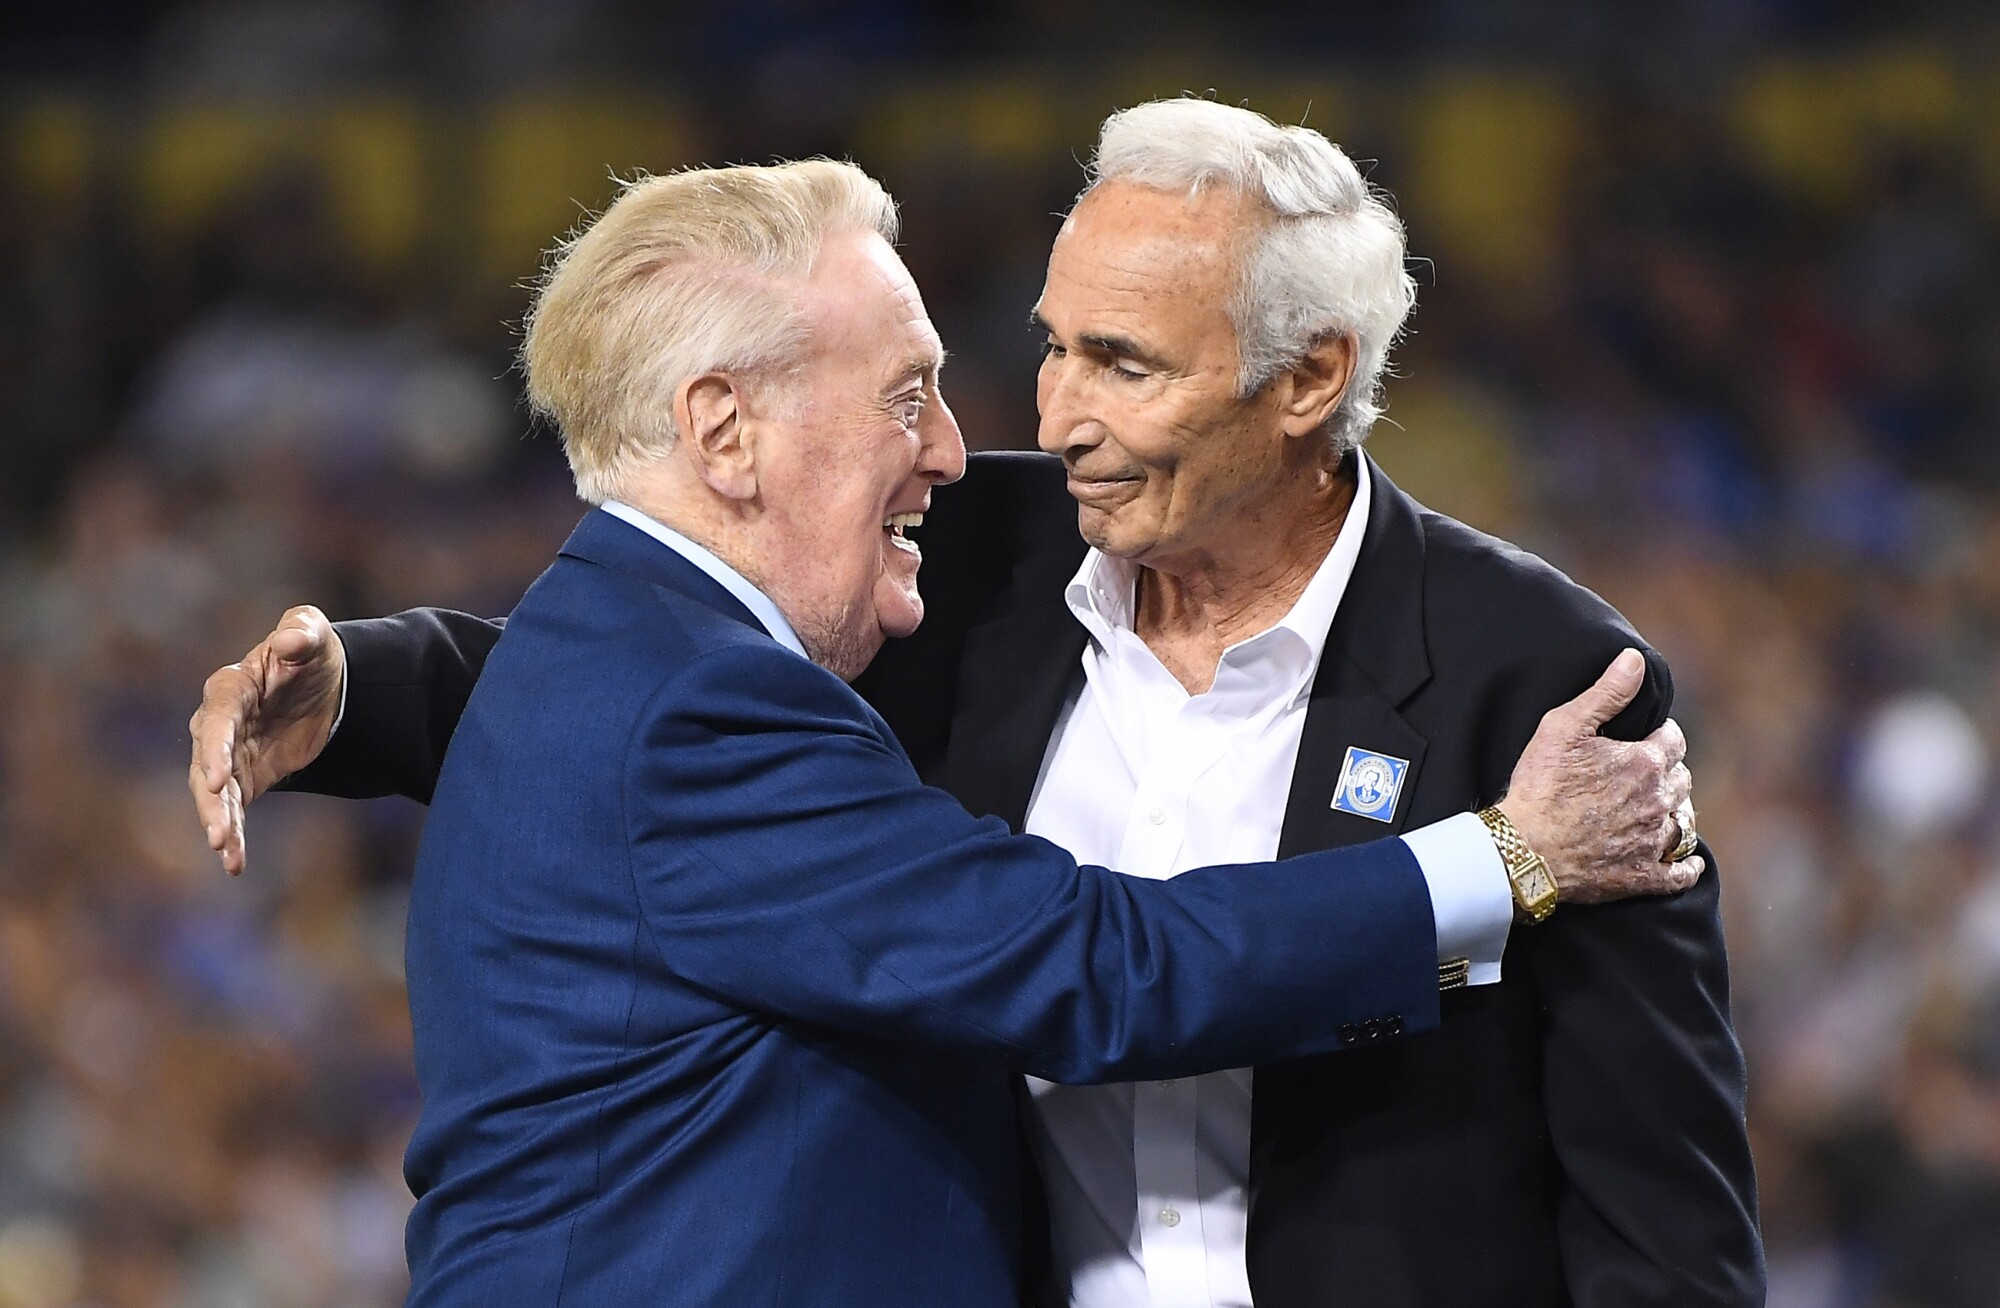 Dodgers announcer Vin Scully hugs former pitcher Sandy Koufax during Vin Scully appreciation night.